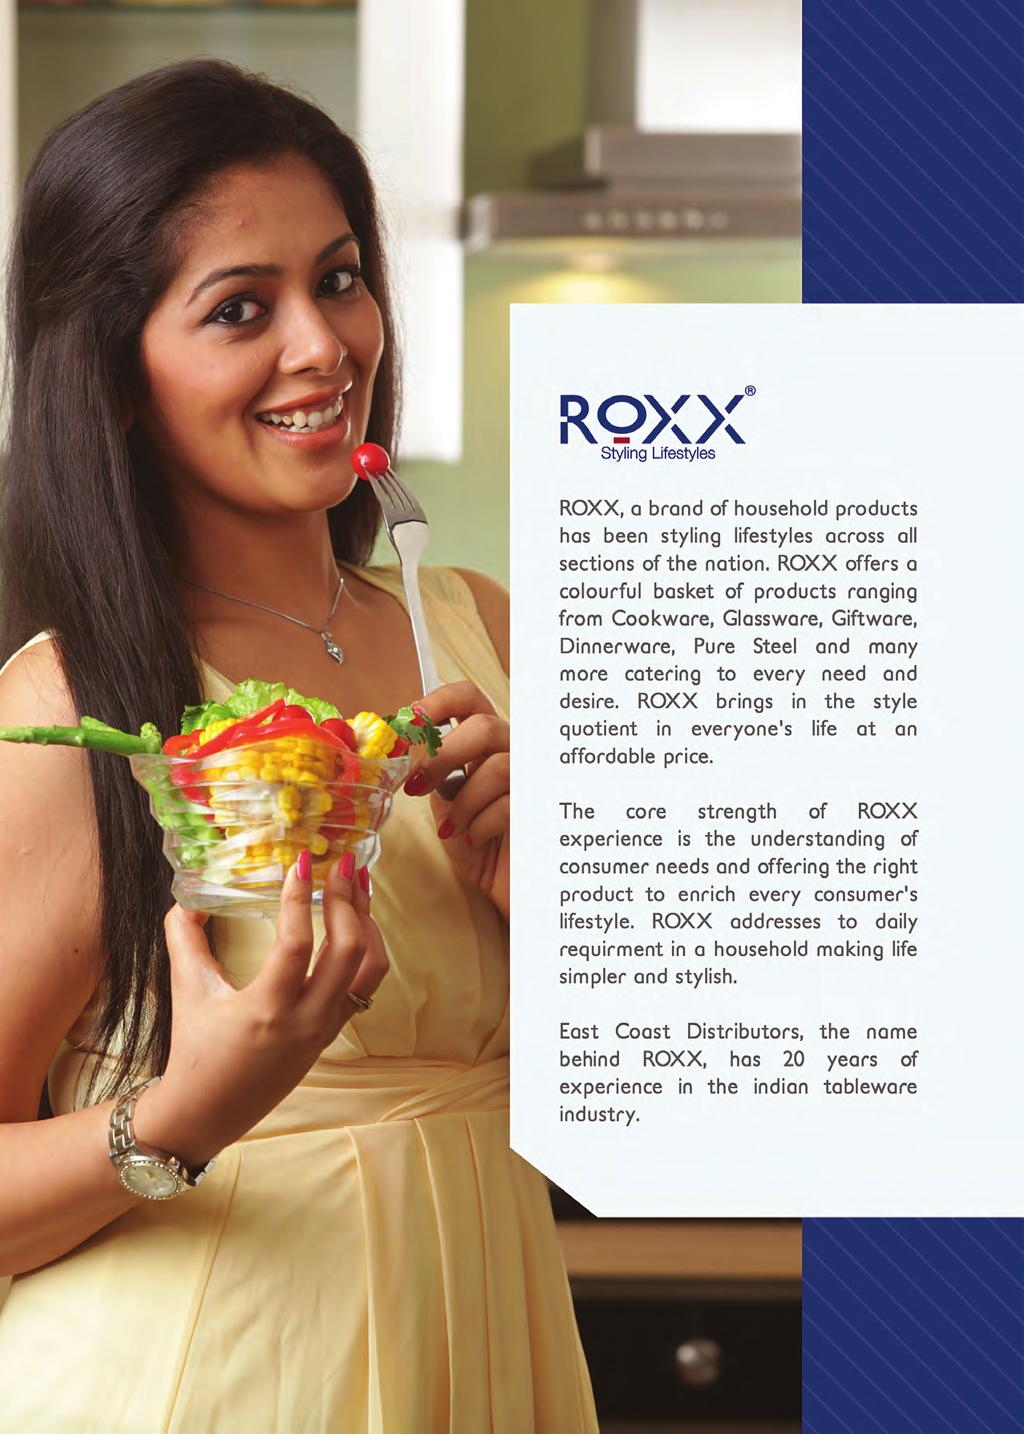 ROXX, a brand of household products has been styling lifestyles across all sections of the nation.